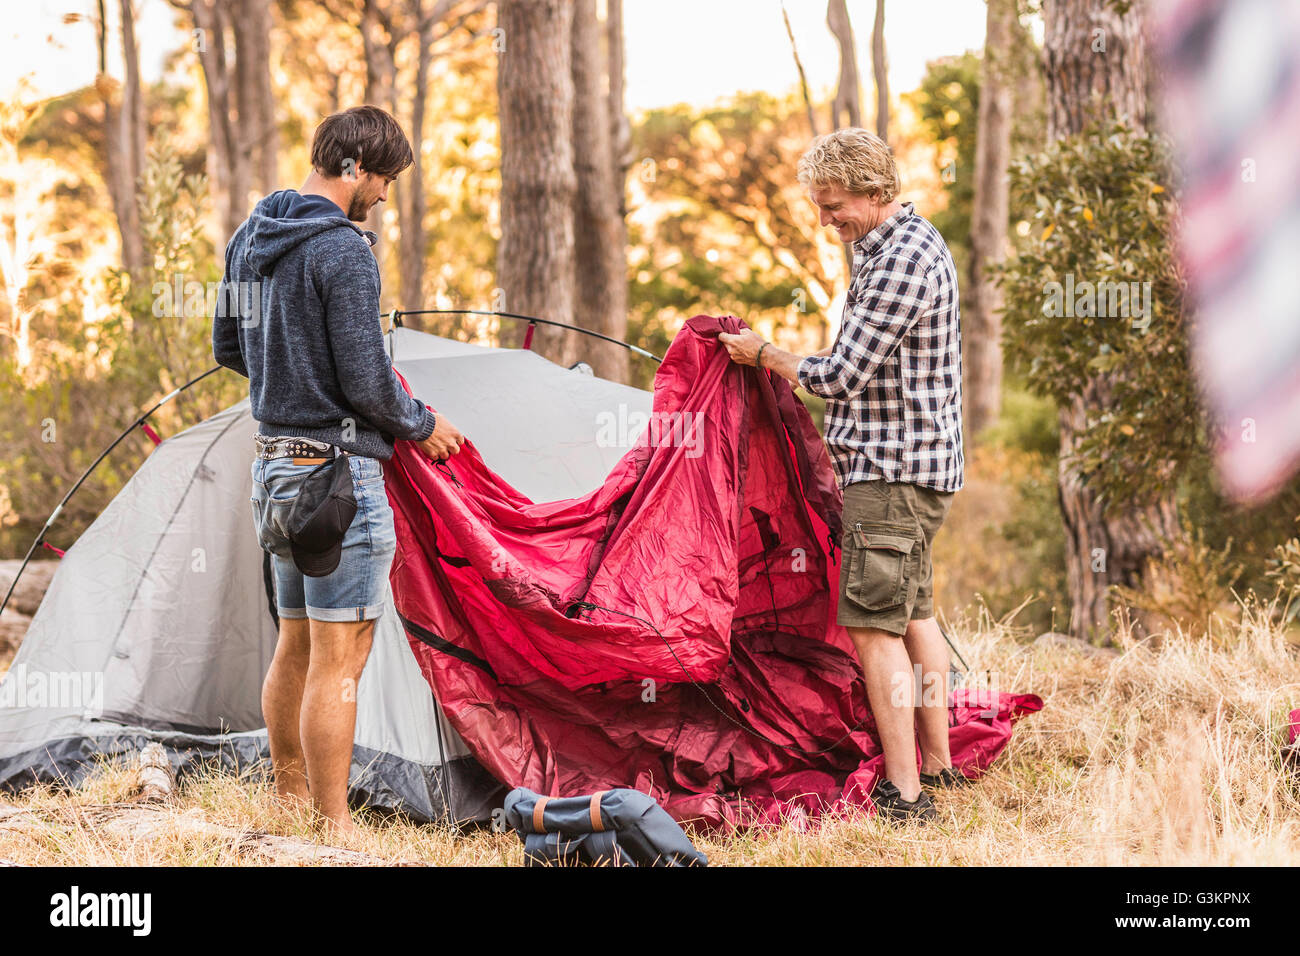 Two men concentrating on putting up tent in forest, Deer Park, Cape Town, South Africa Stock Photo